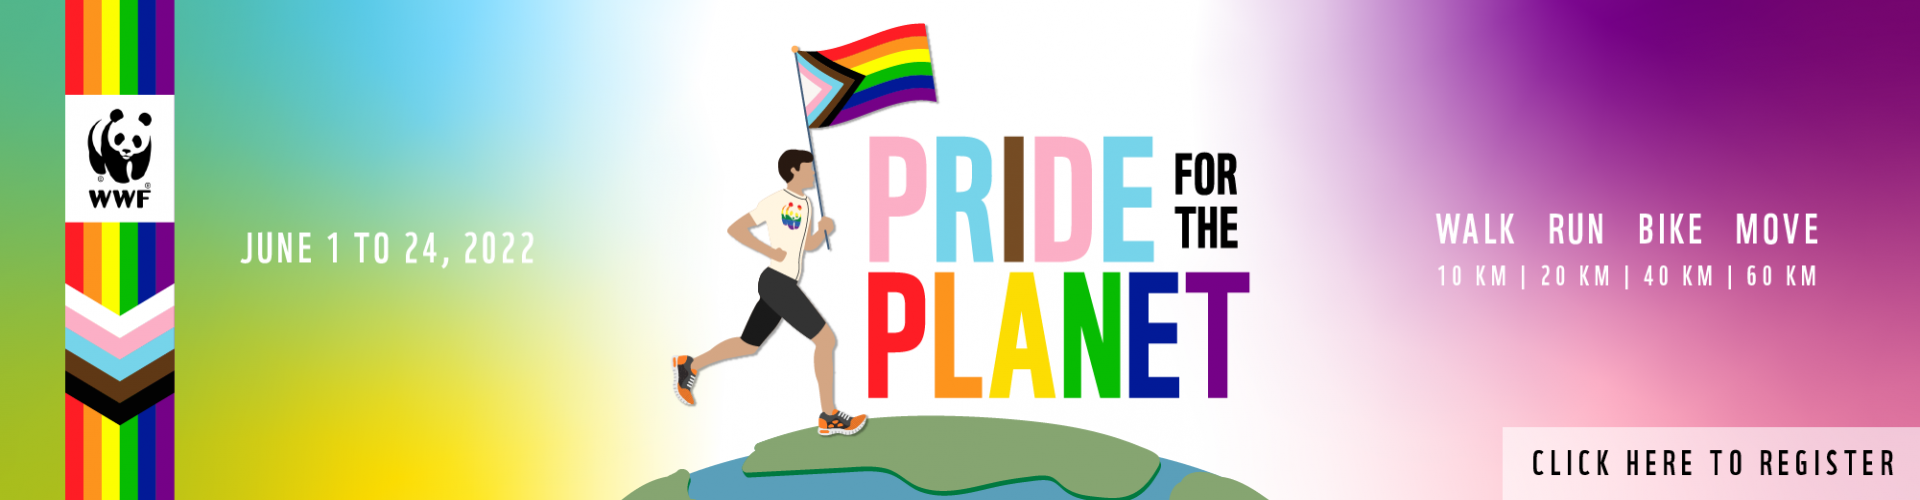 WFF-Philippines' Pride for the Planet